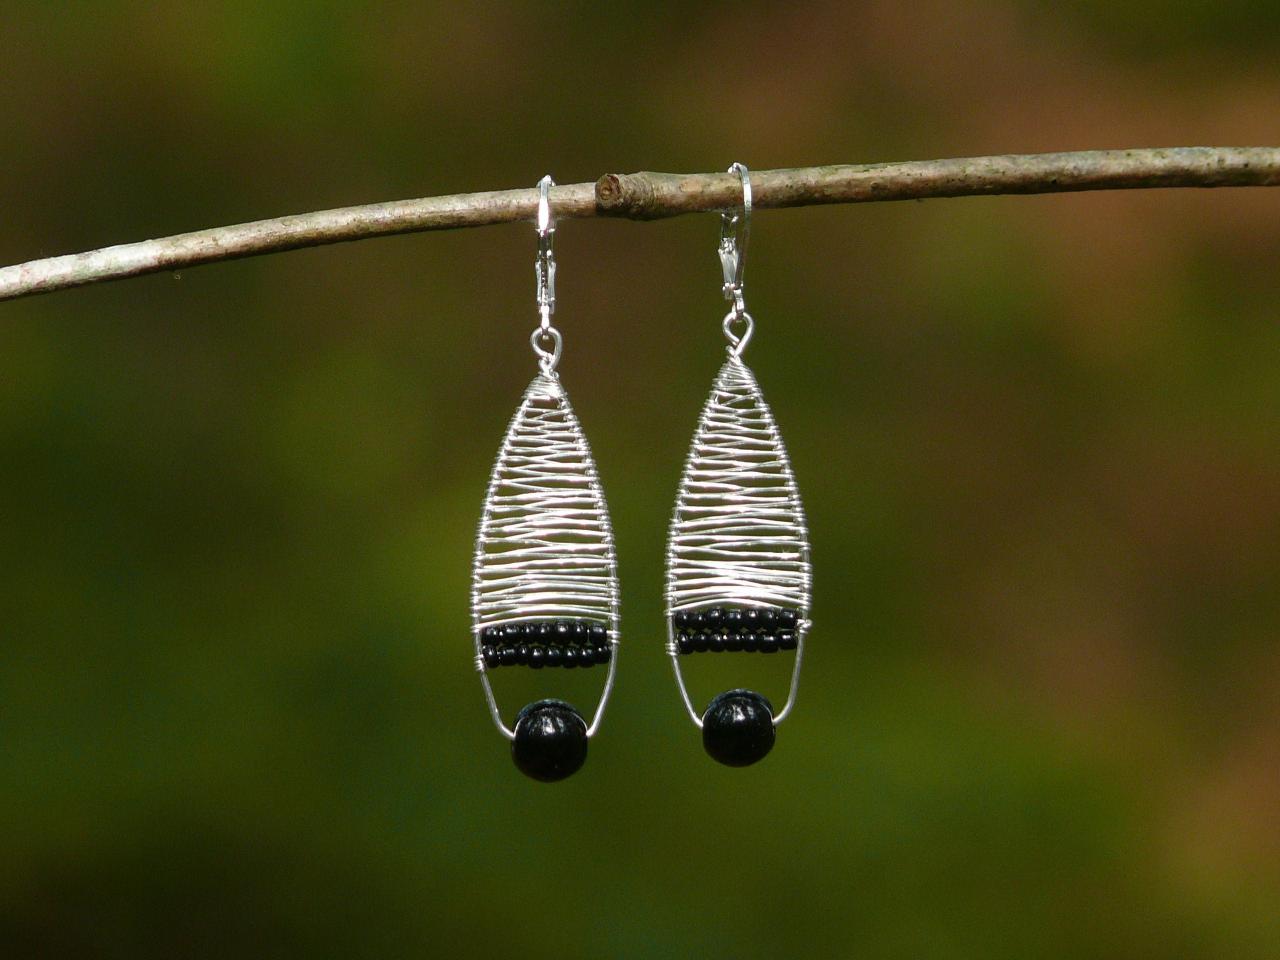 Elegant Black And Silver Earrings, Wire Wrapped Silver Earrings With Black Beads, Black Boho Earrings,dainty Wire Earrings,statement Jewelry